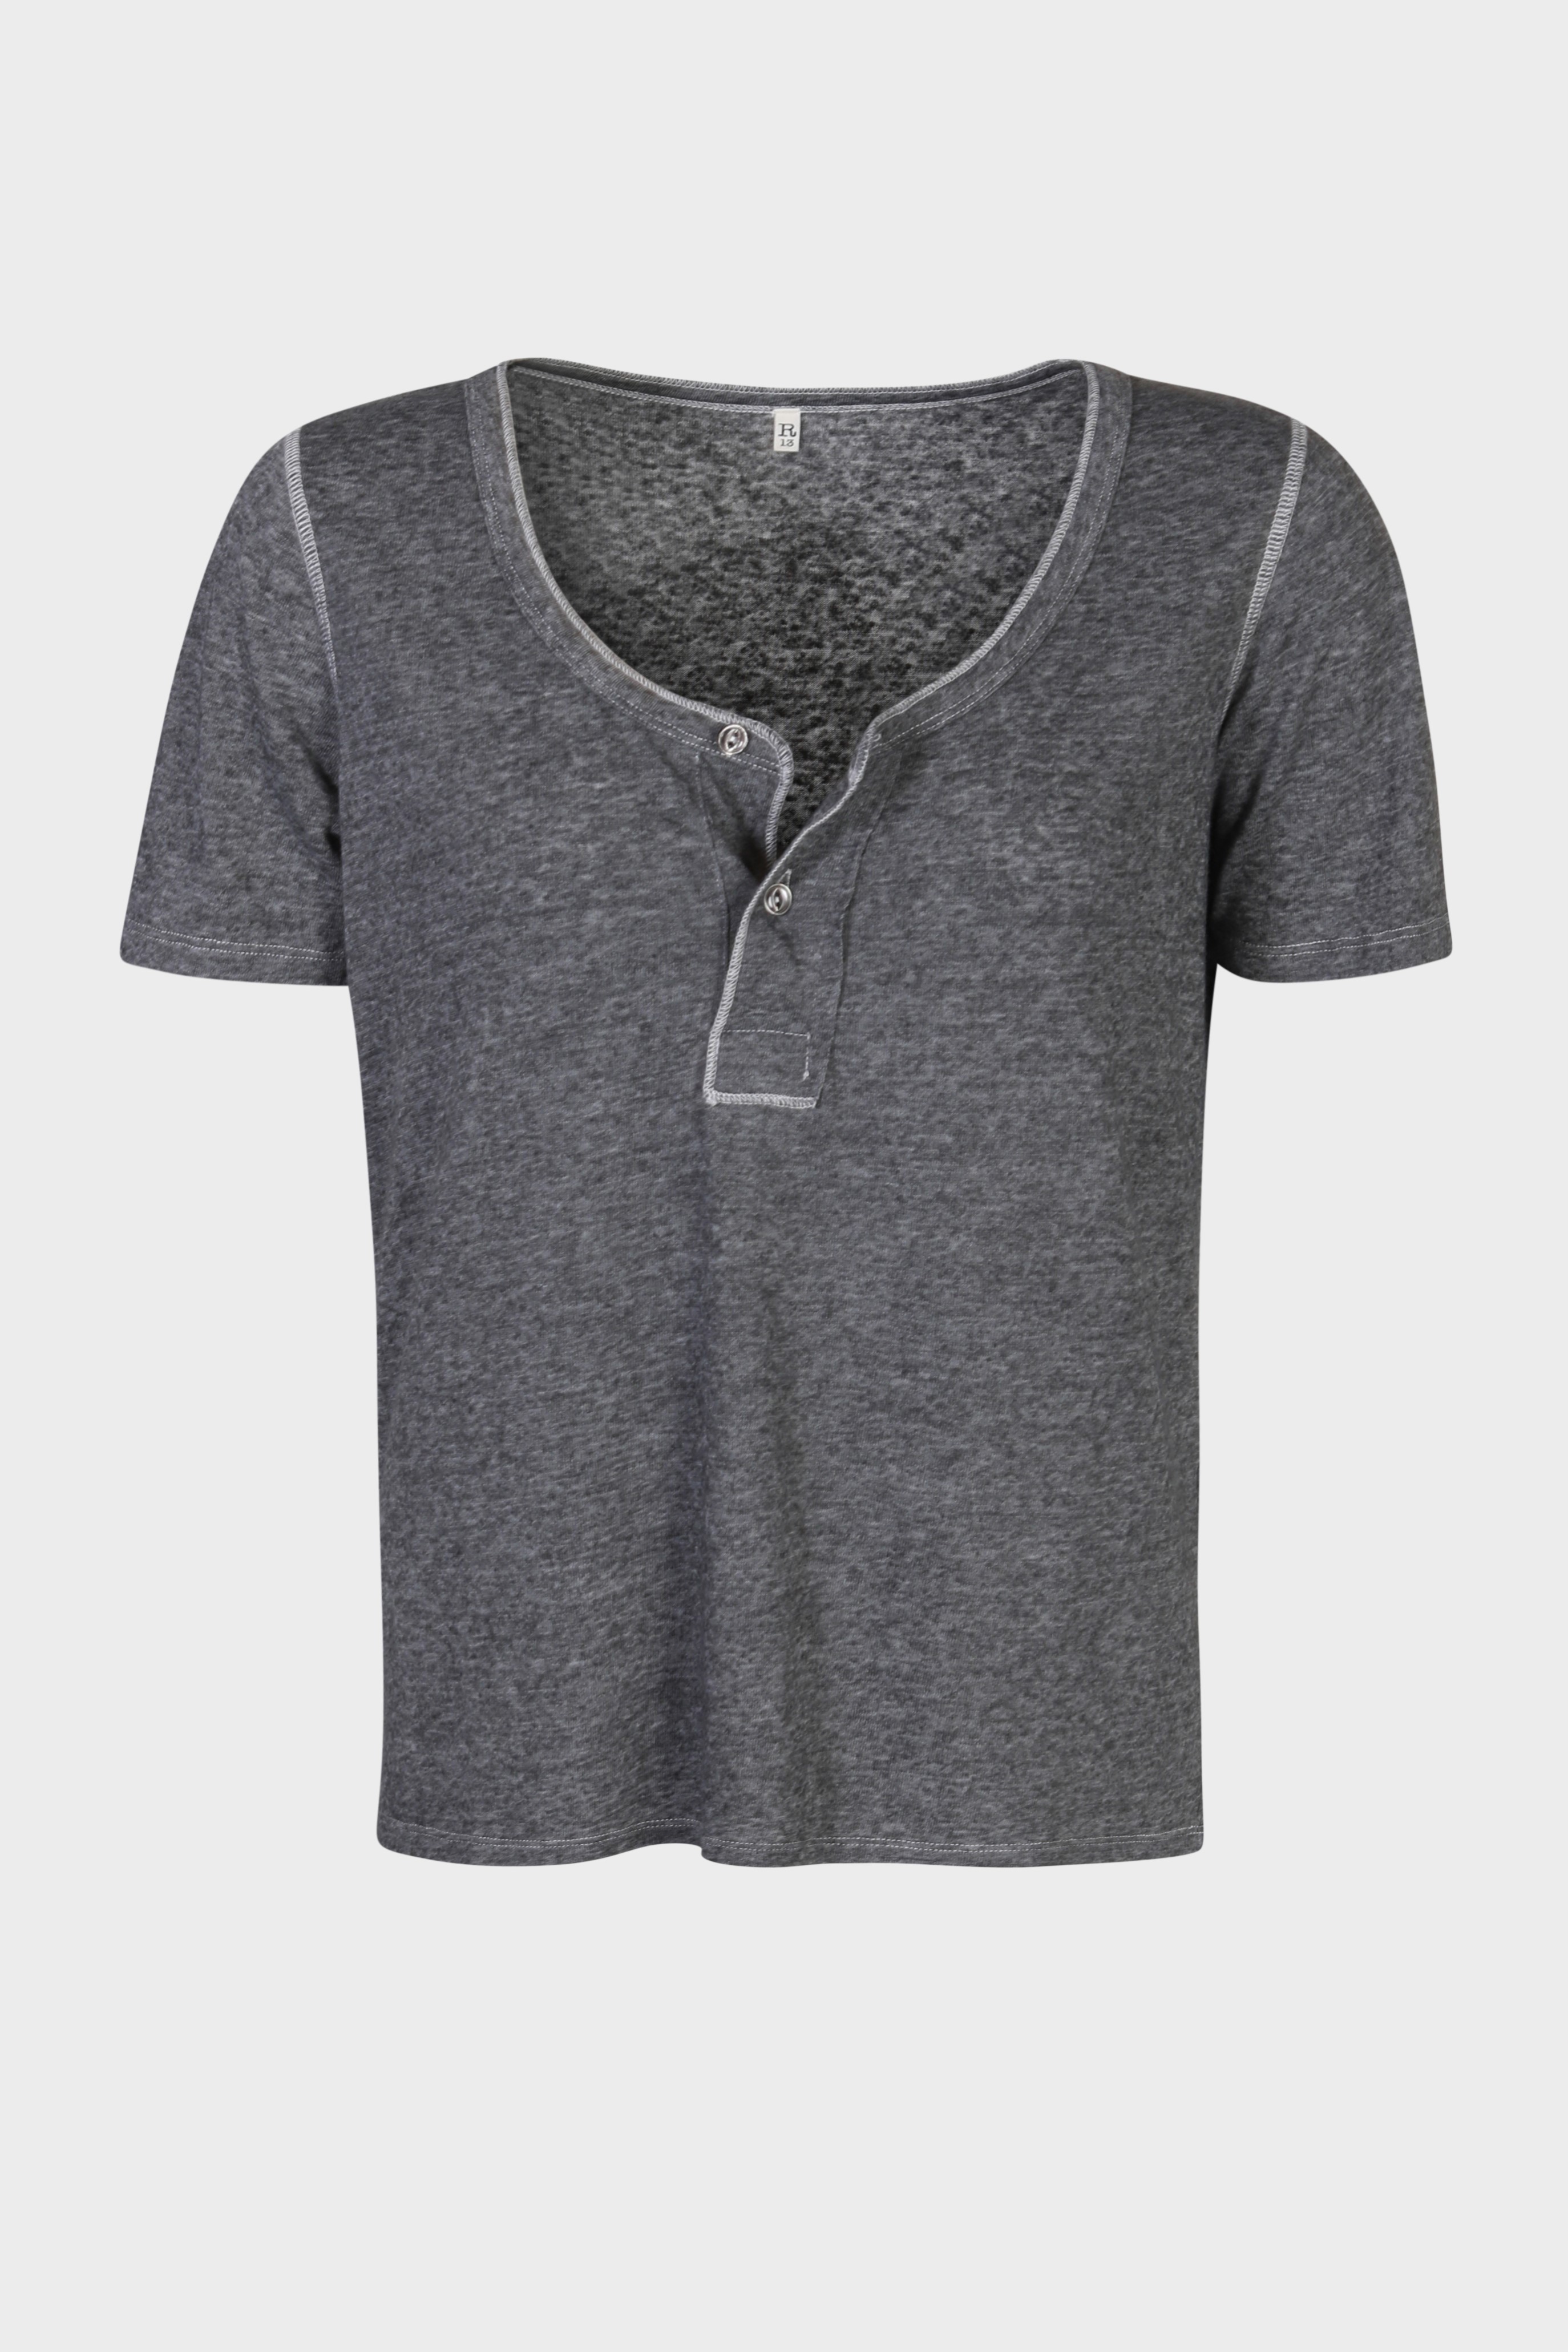 R13 Low Neck Henley Tee in Charcoal M